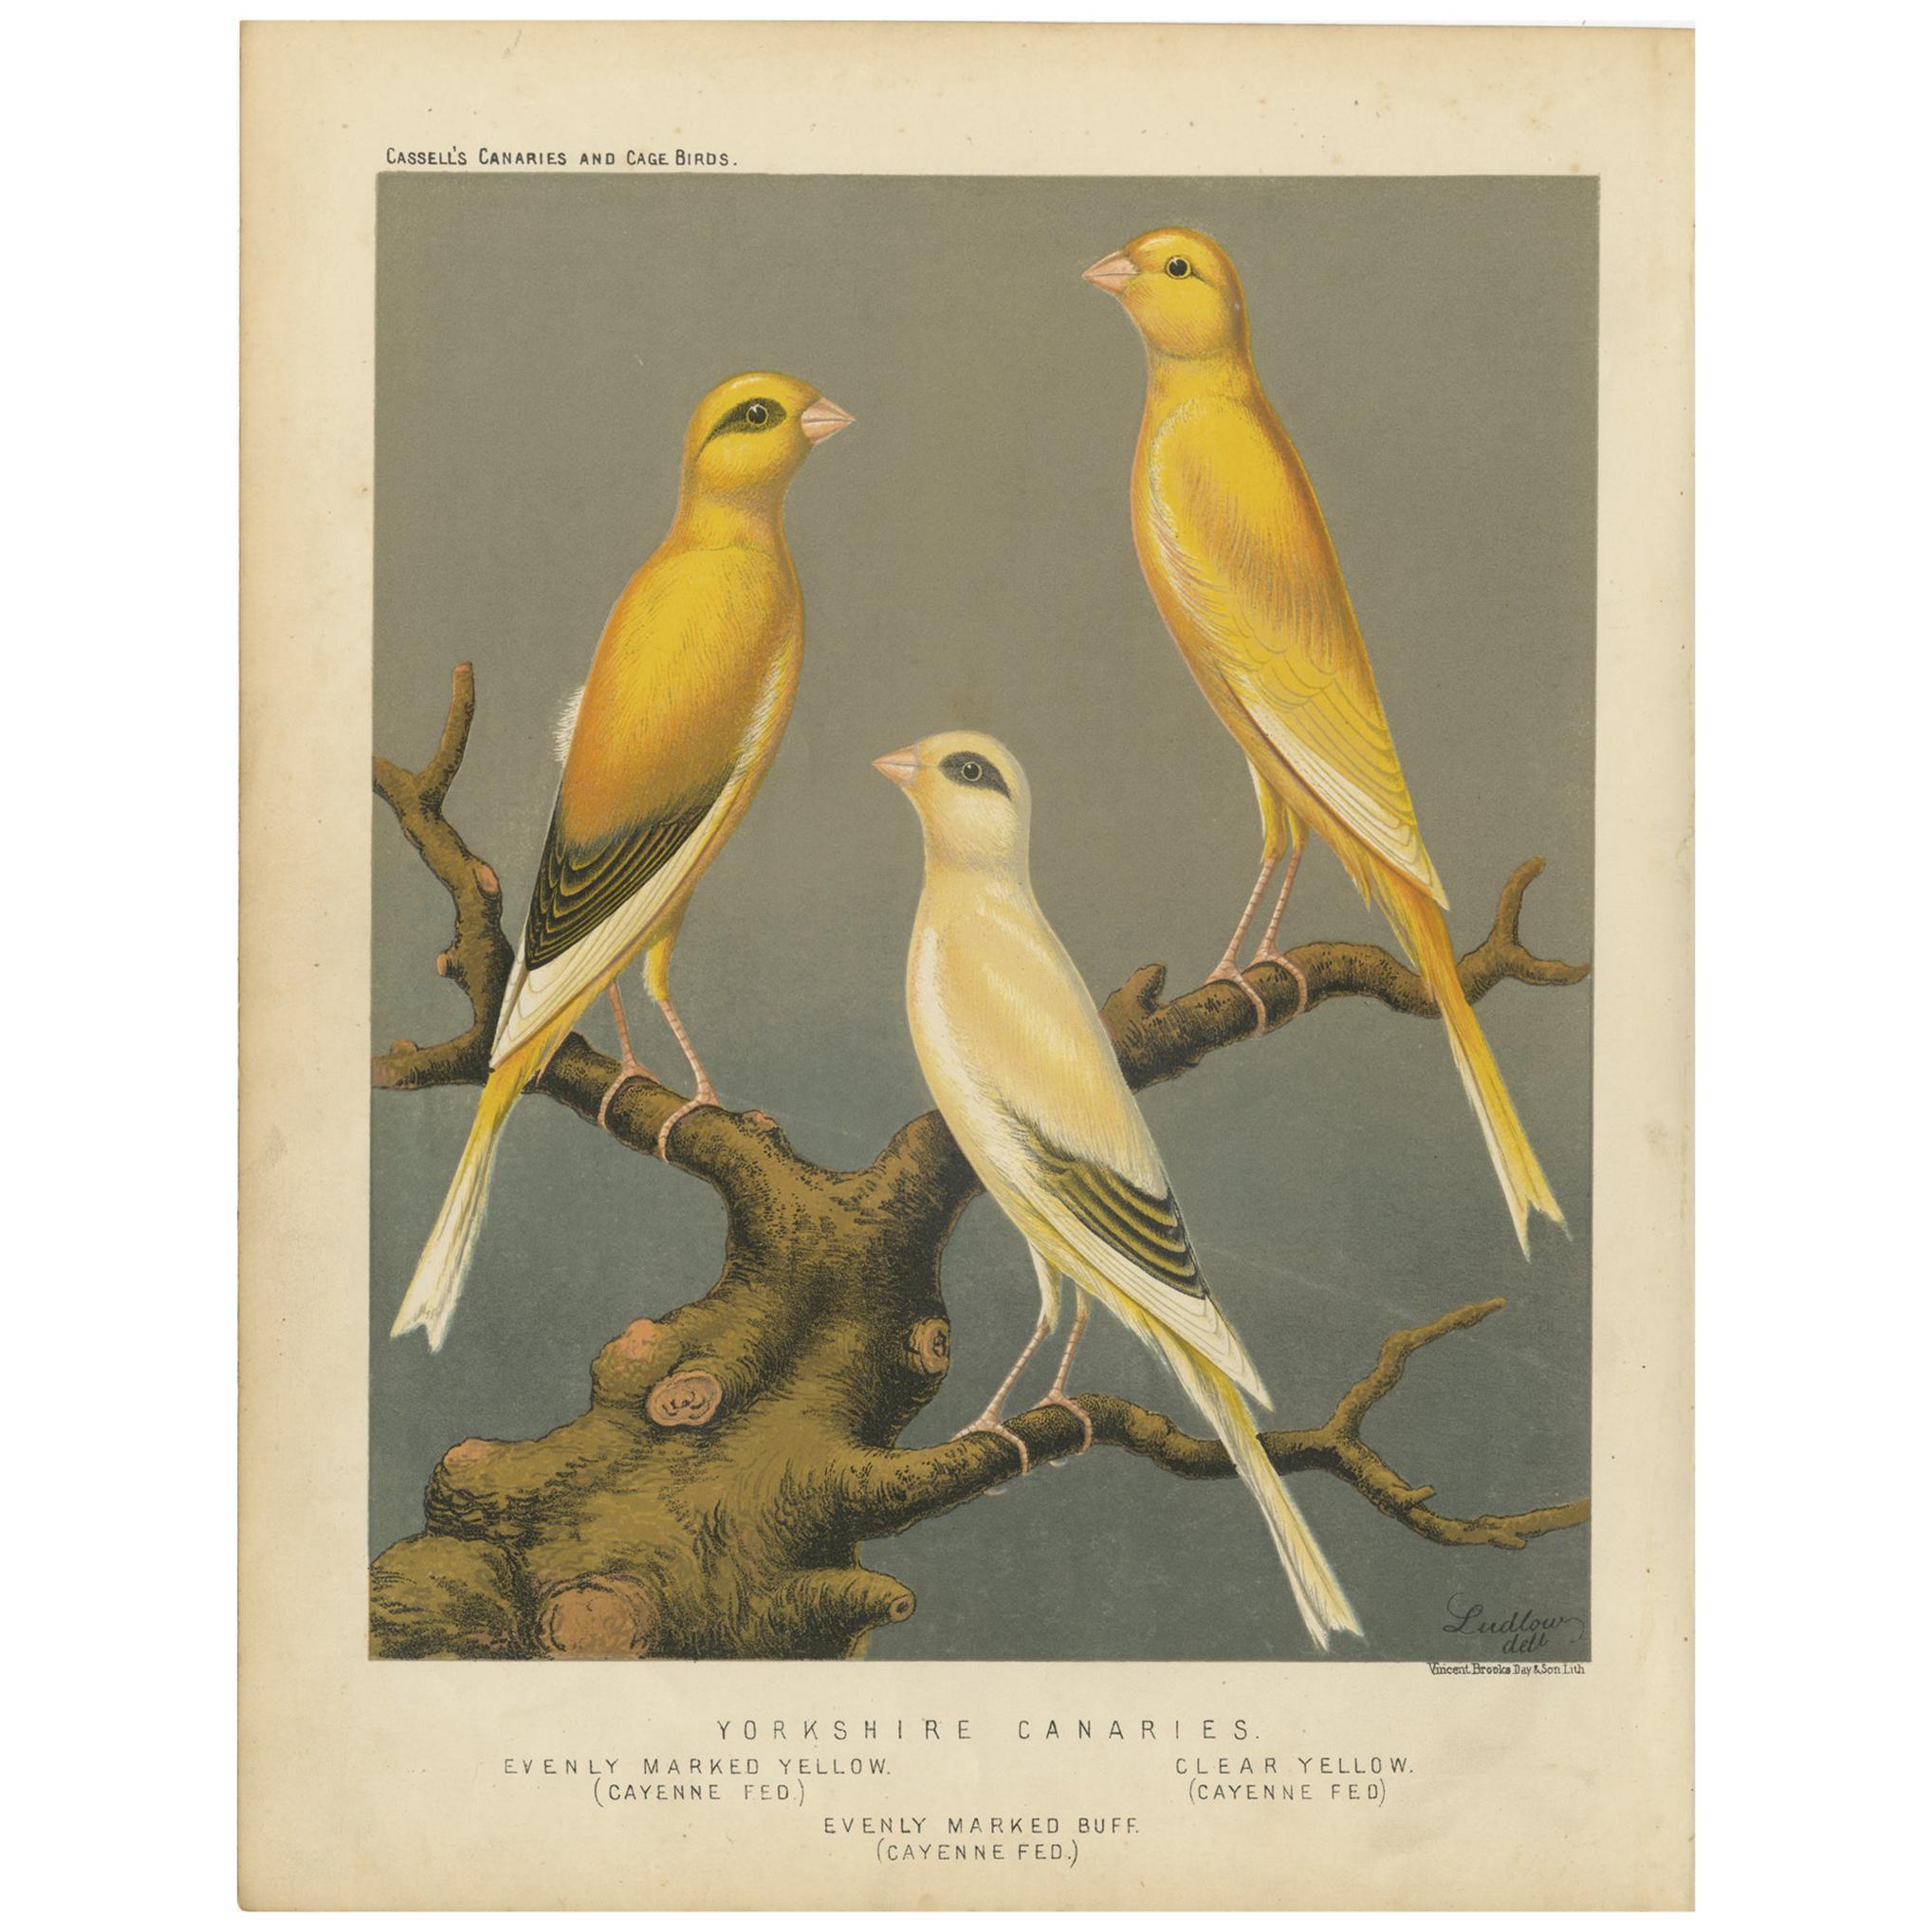 Antique Bird Print of the Yorkshire Canaries Evenly Marked Yellow and Others For Sale